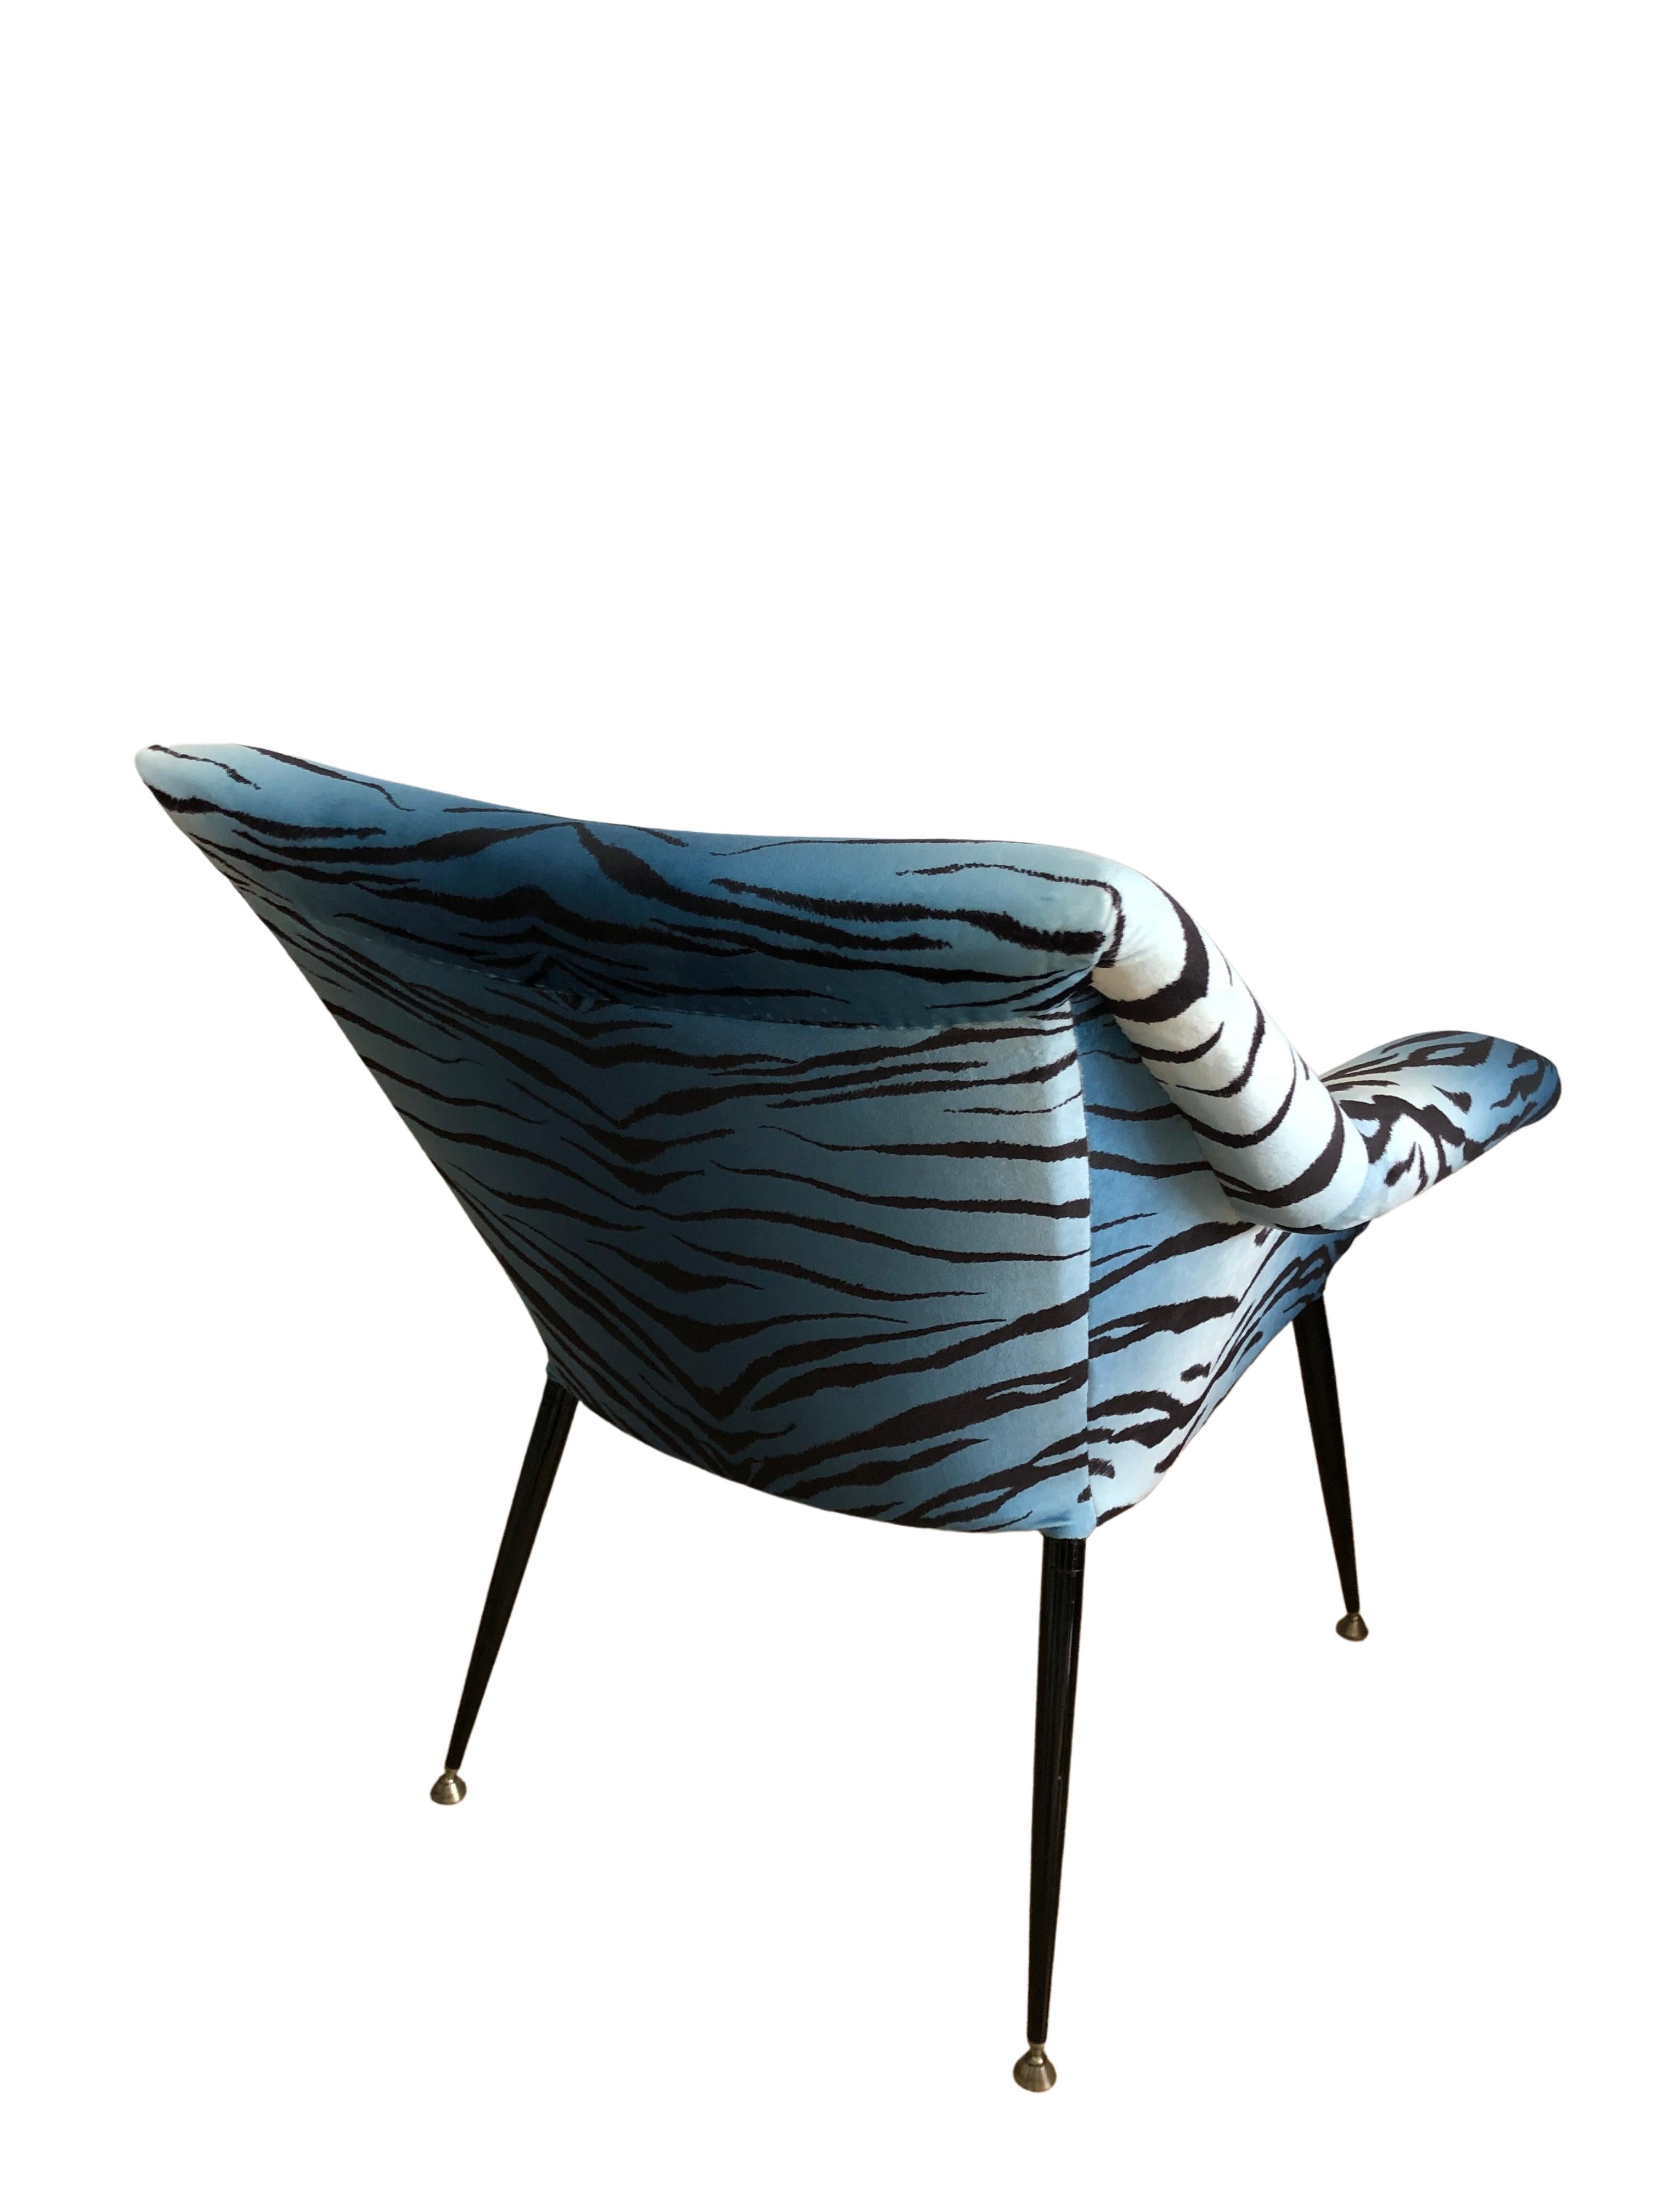 Hand-Crafted Midcentury Armchair, in Blue Zebra Print Velvet, Europe, 1960s For Sale